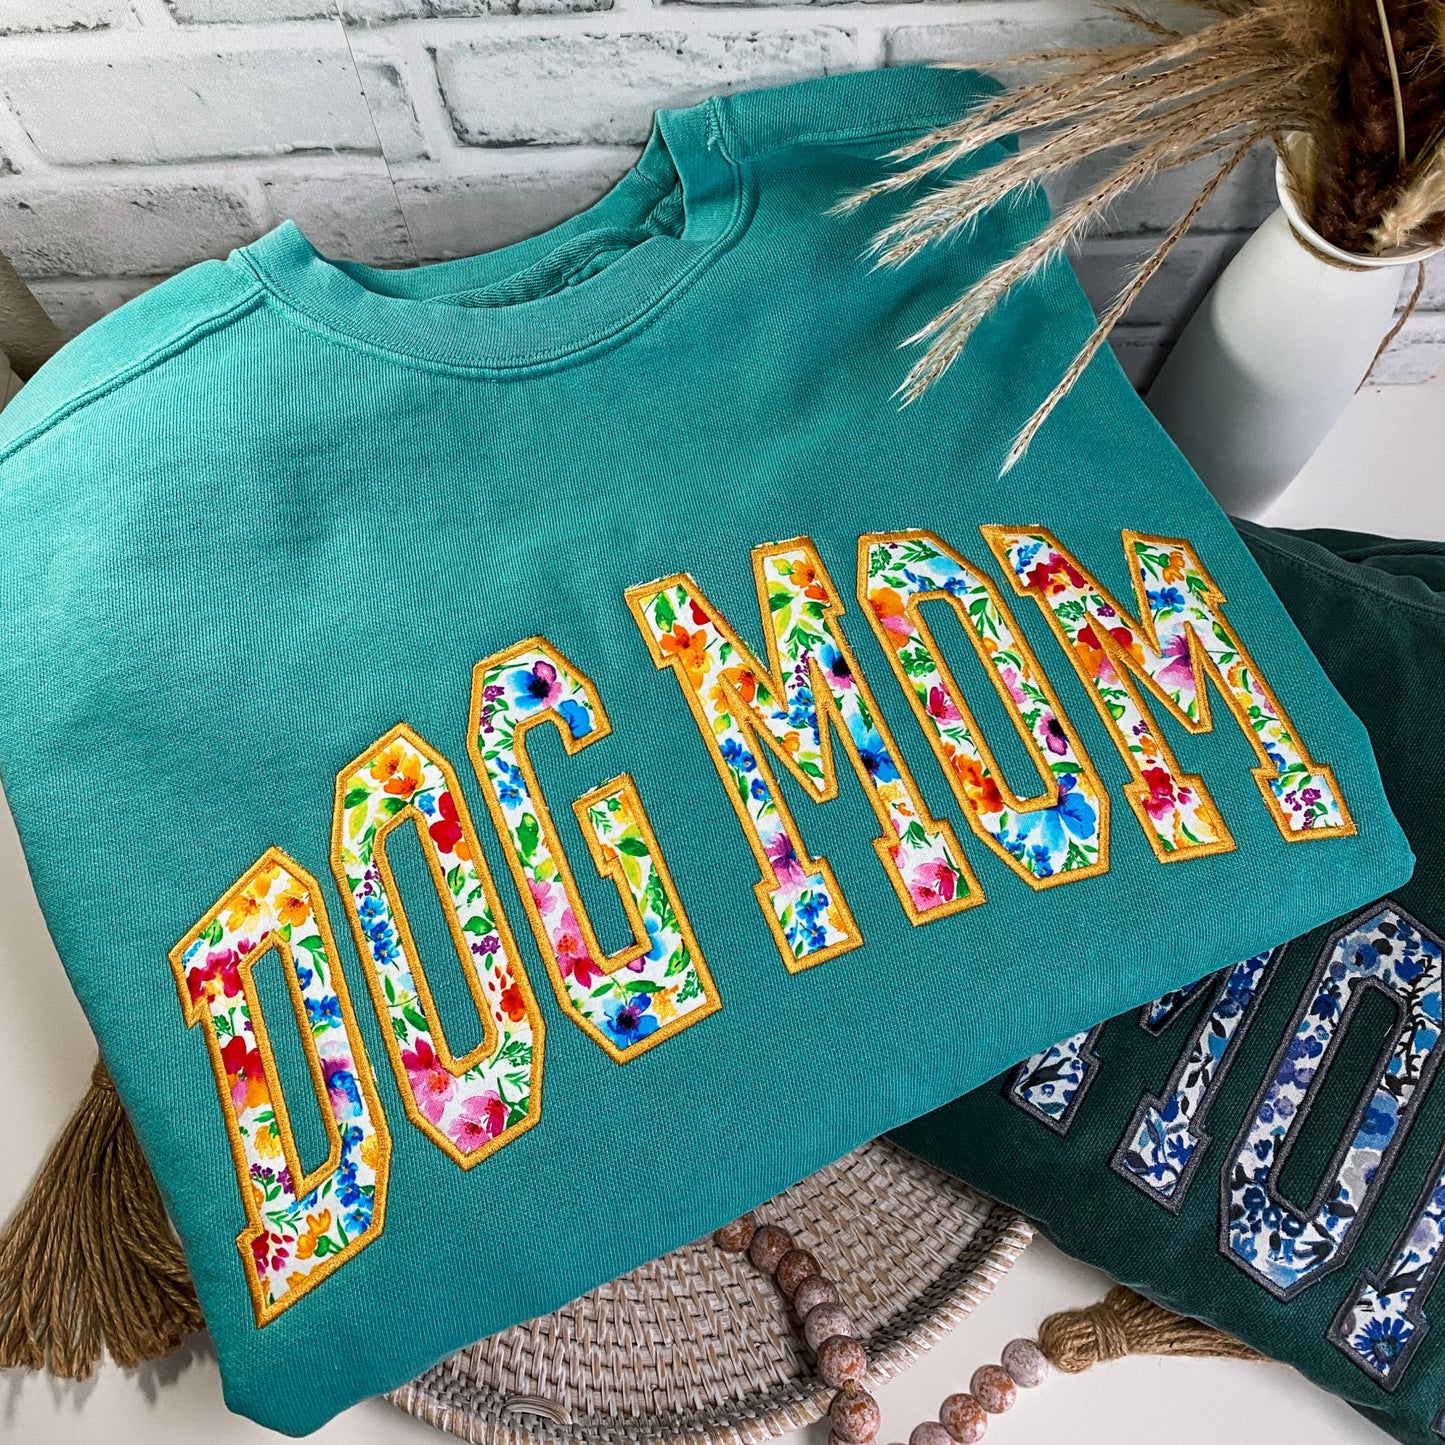 Custom Arched Text Appliqué Sweatshirt | Embroidered